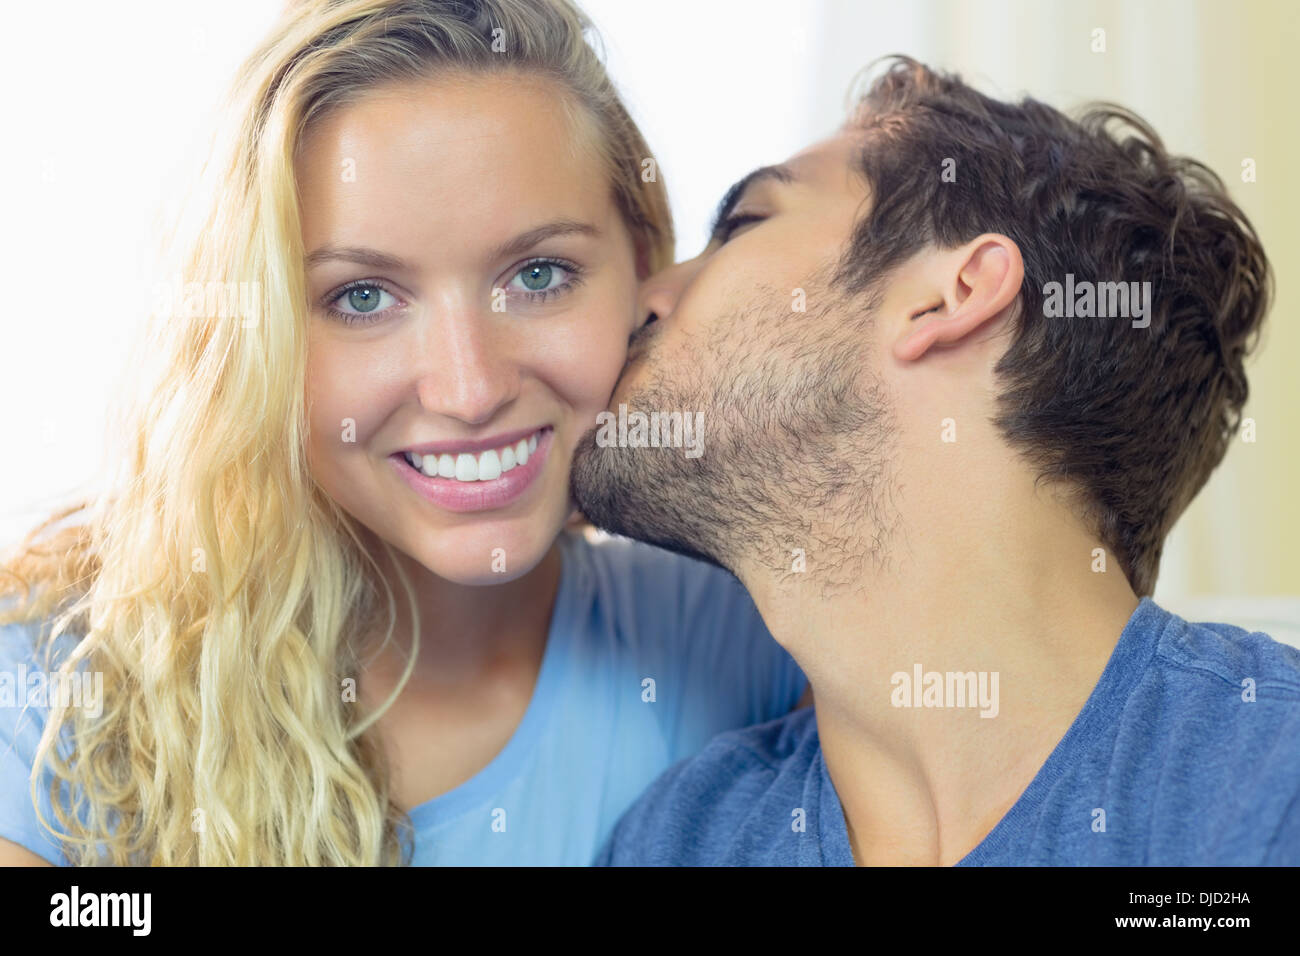 Blonde young woman being kissed on her cheek by her boyfriend Stock Photo